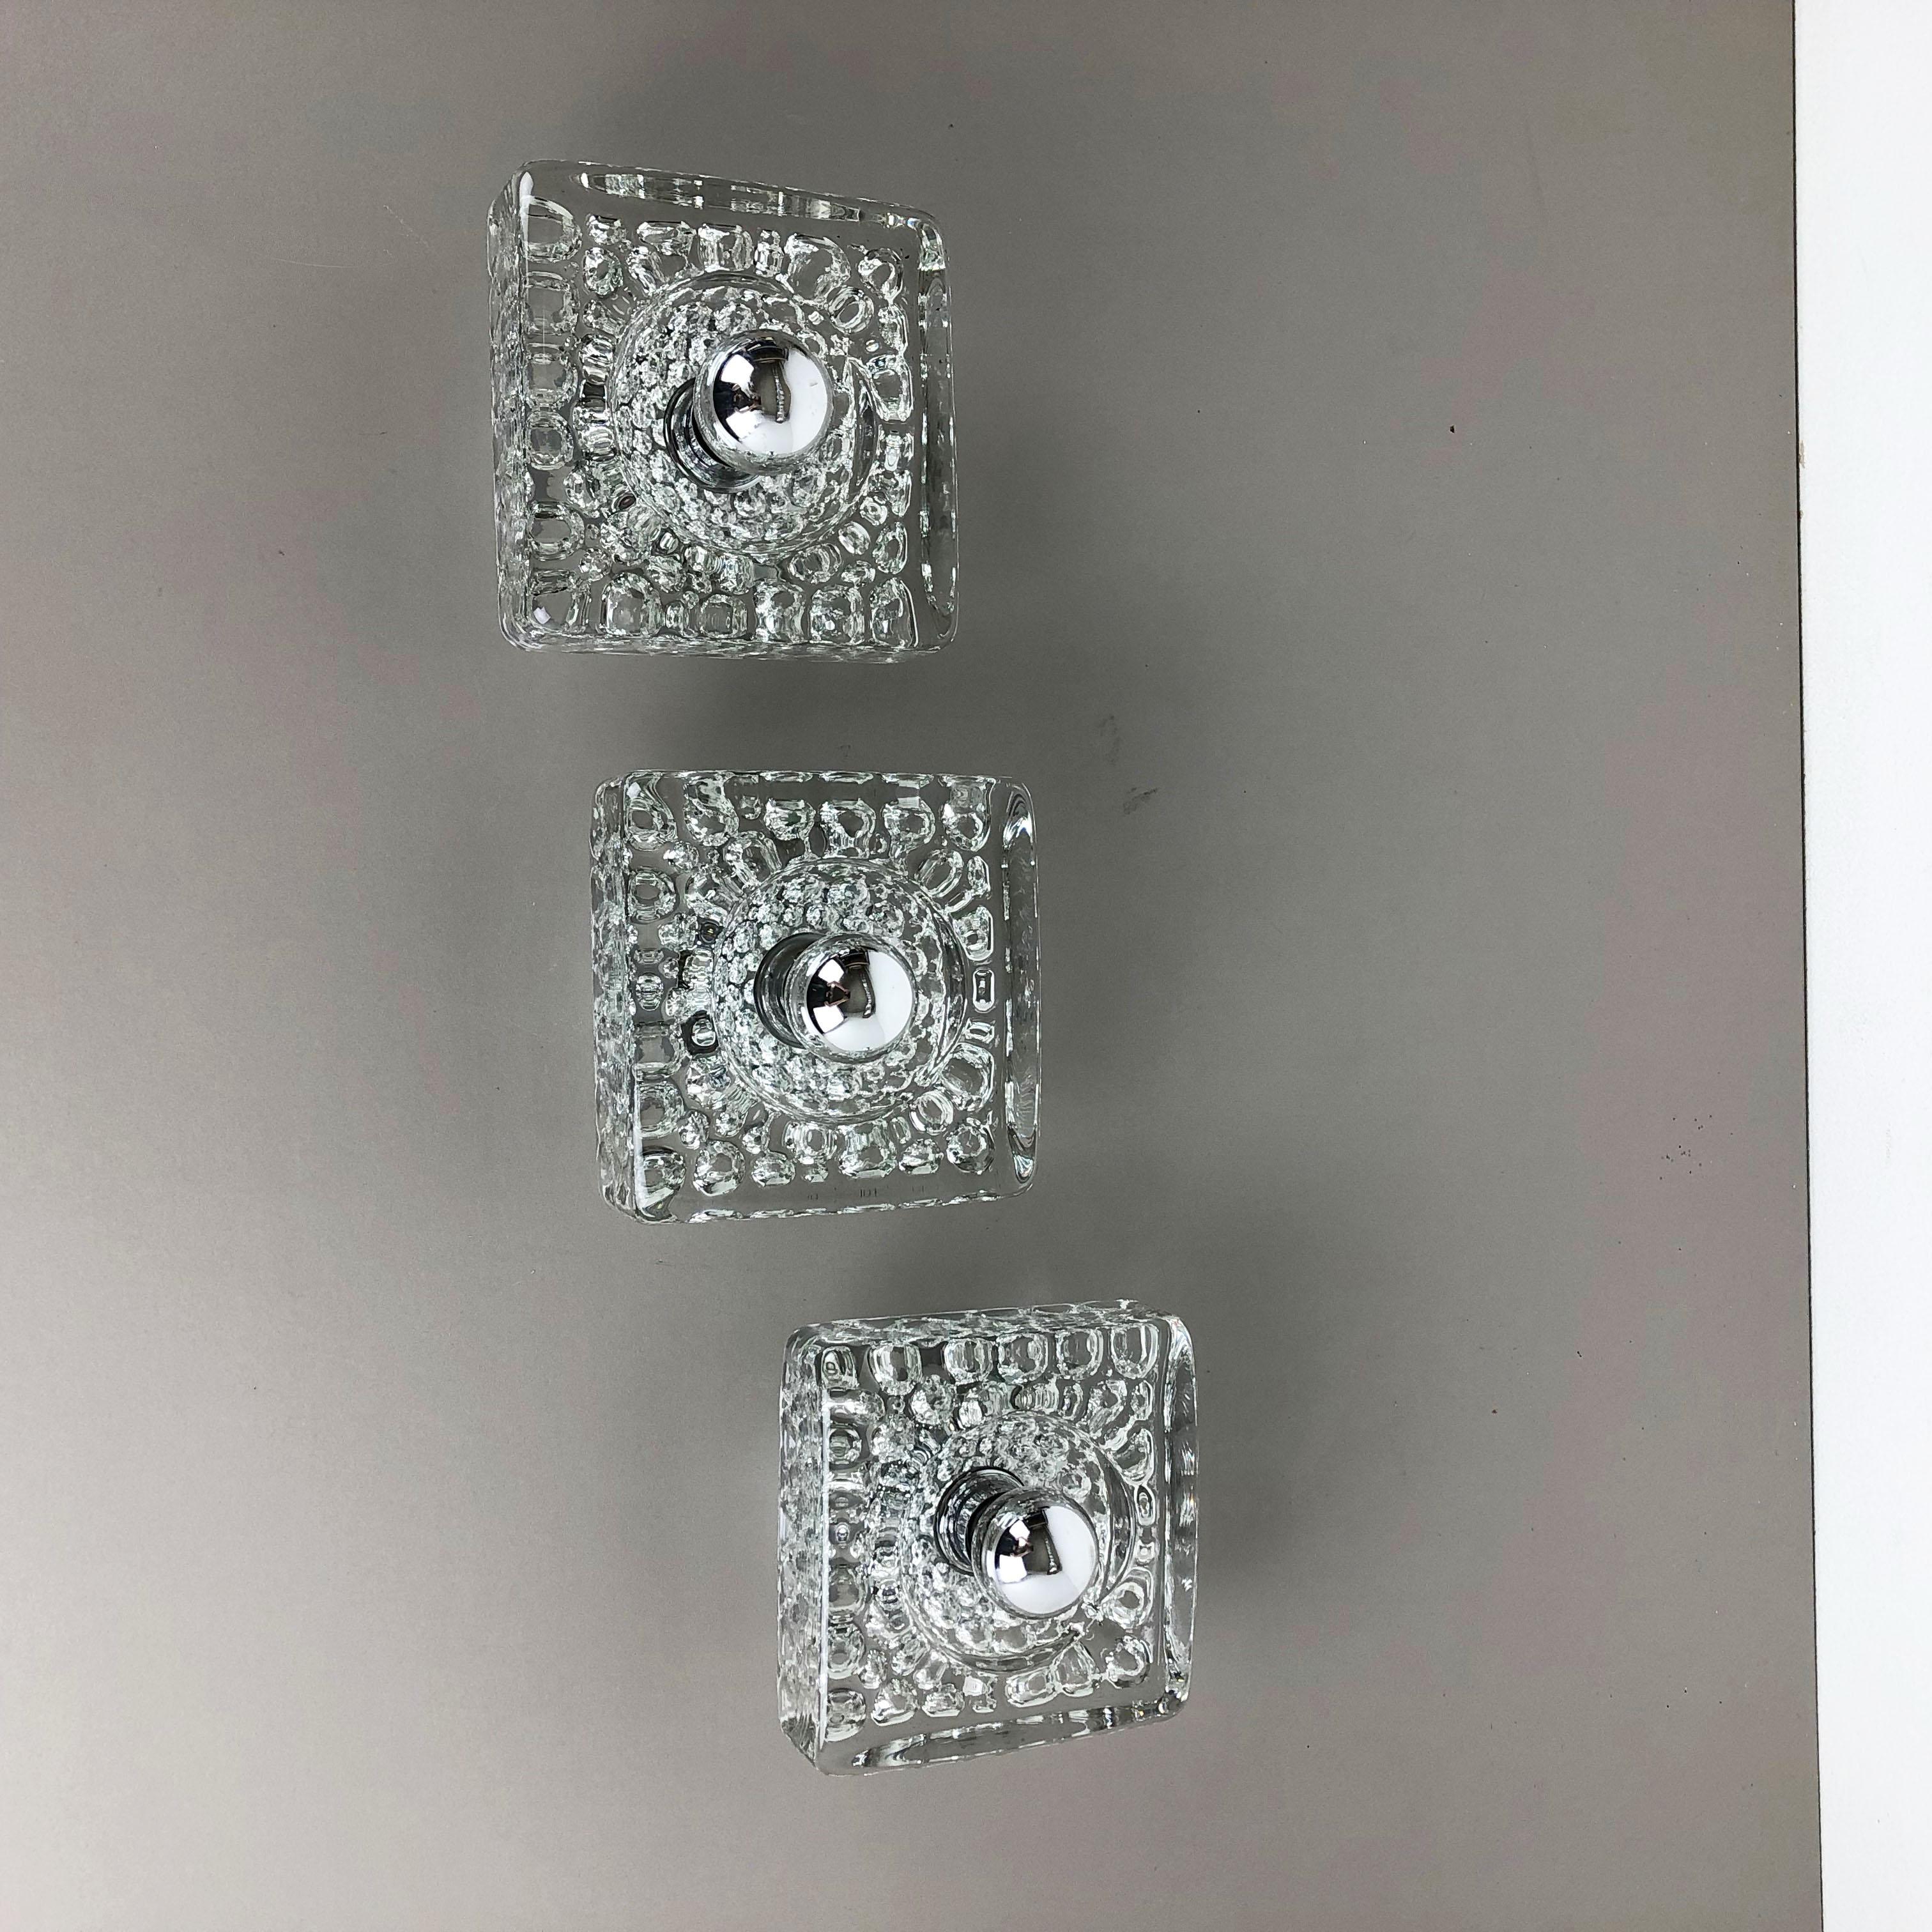 Article:

Wall light sconce set of 3


Producer:

Hillebrand, Germany



Origin:

Germany



Age:

1970s





Original set of 3 modernist German wall lights made of high quality glass in ice cube form with a solid metal